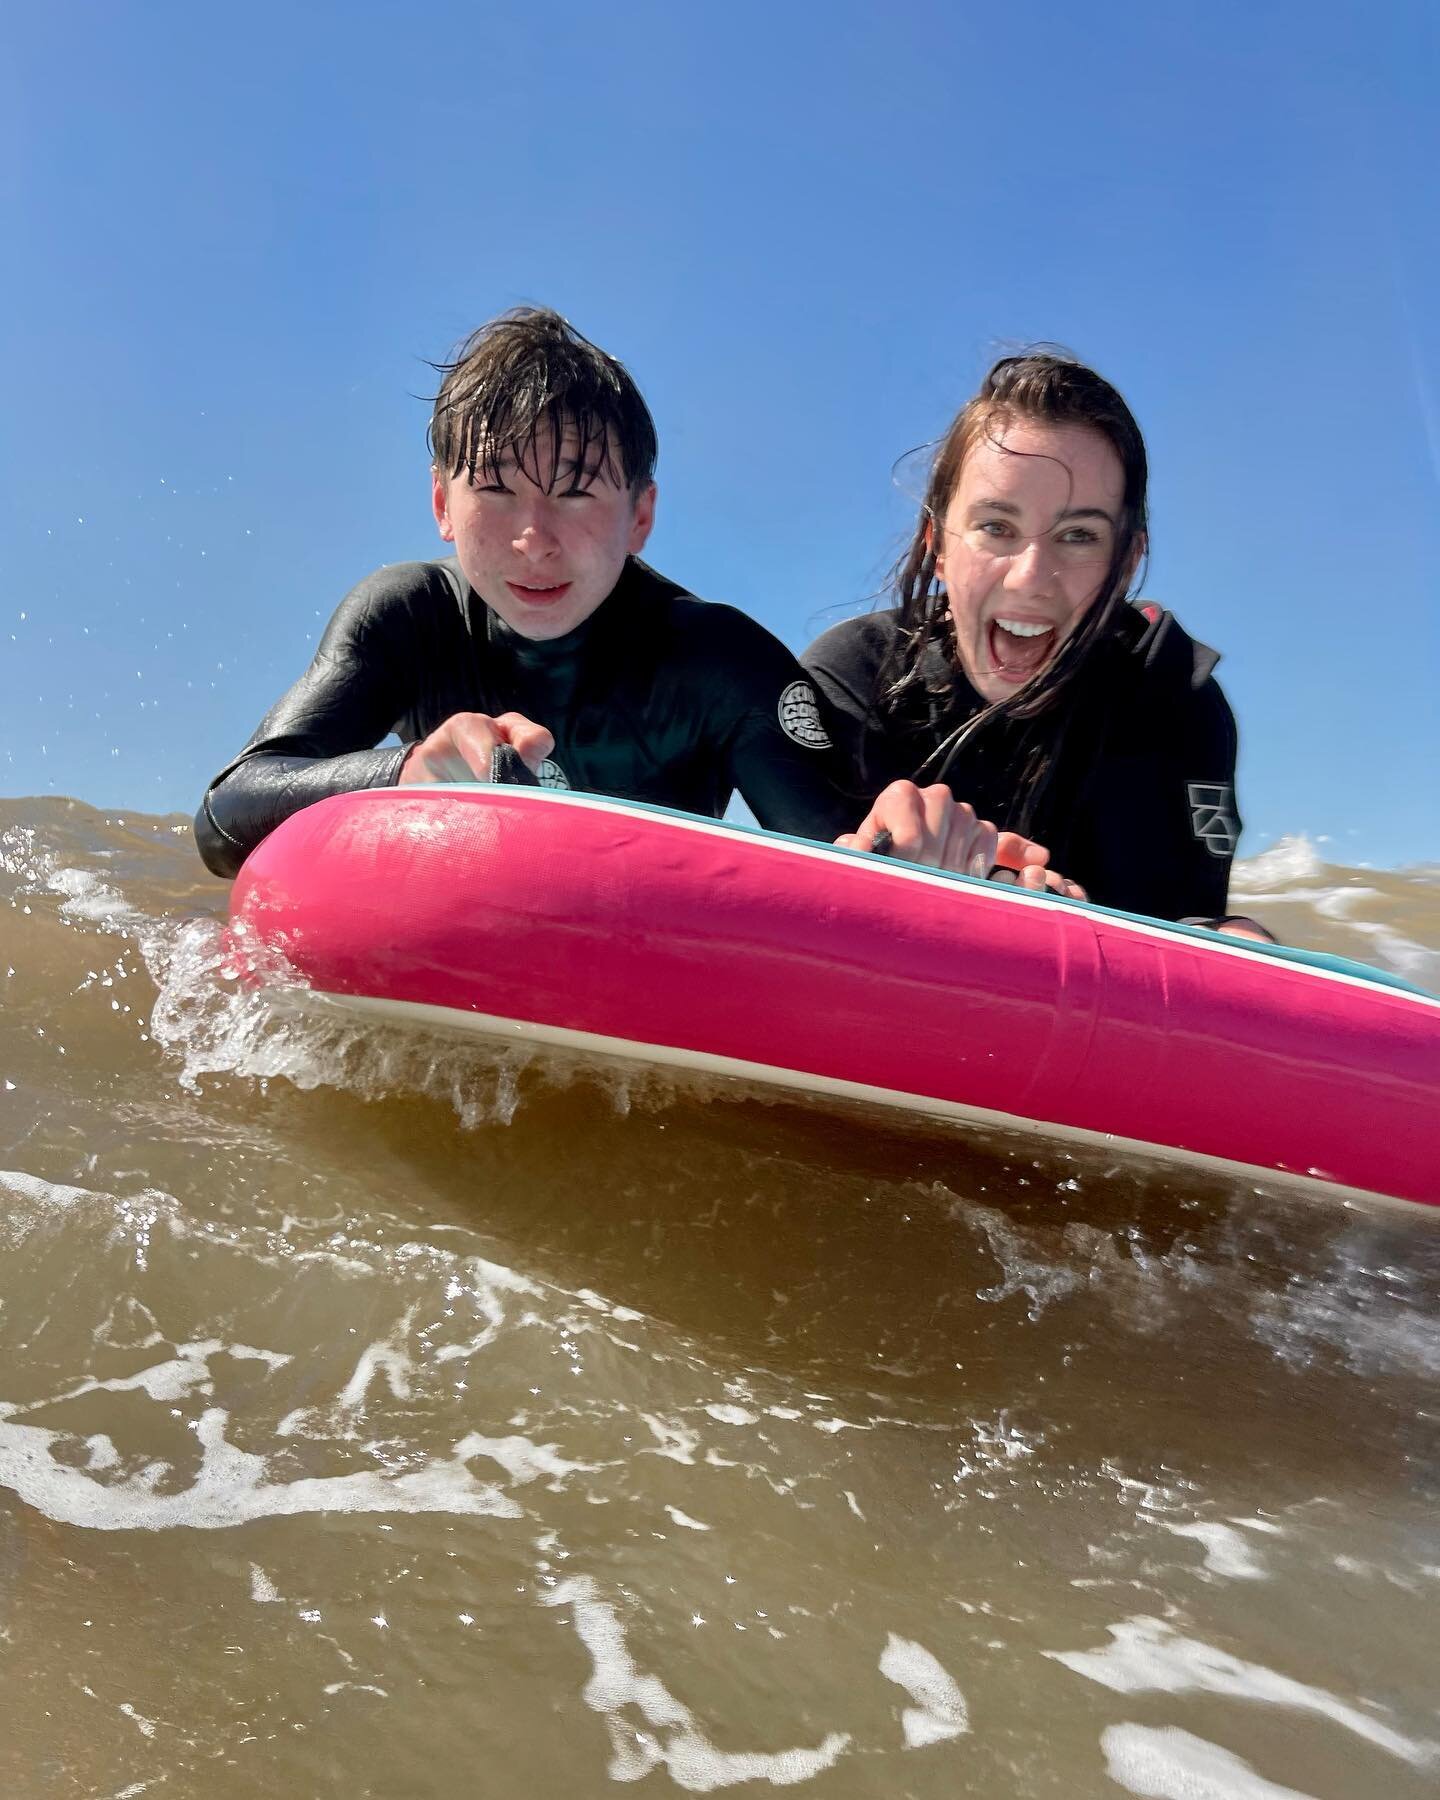 Spent a very special day with youth from @edgewood_center NPS school program. The kids were fantastic, so stoked and in the water the entire time, as what a great way to spend a school day! It is always special for Tim and I to take the Edgewood kids